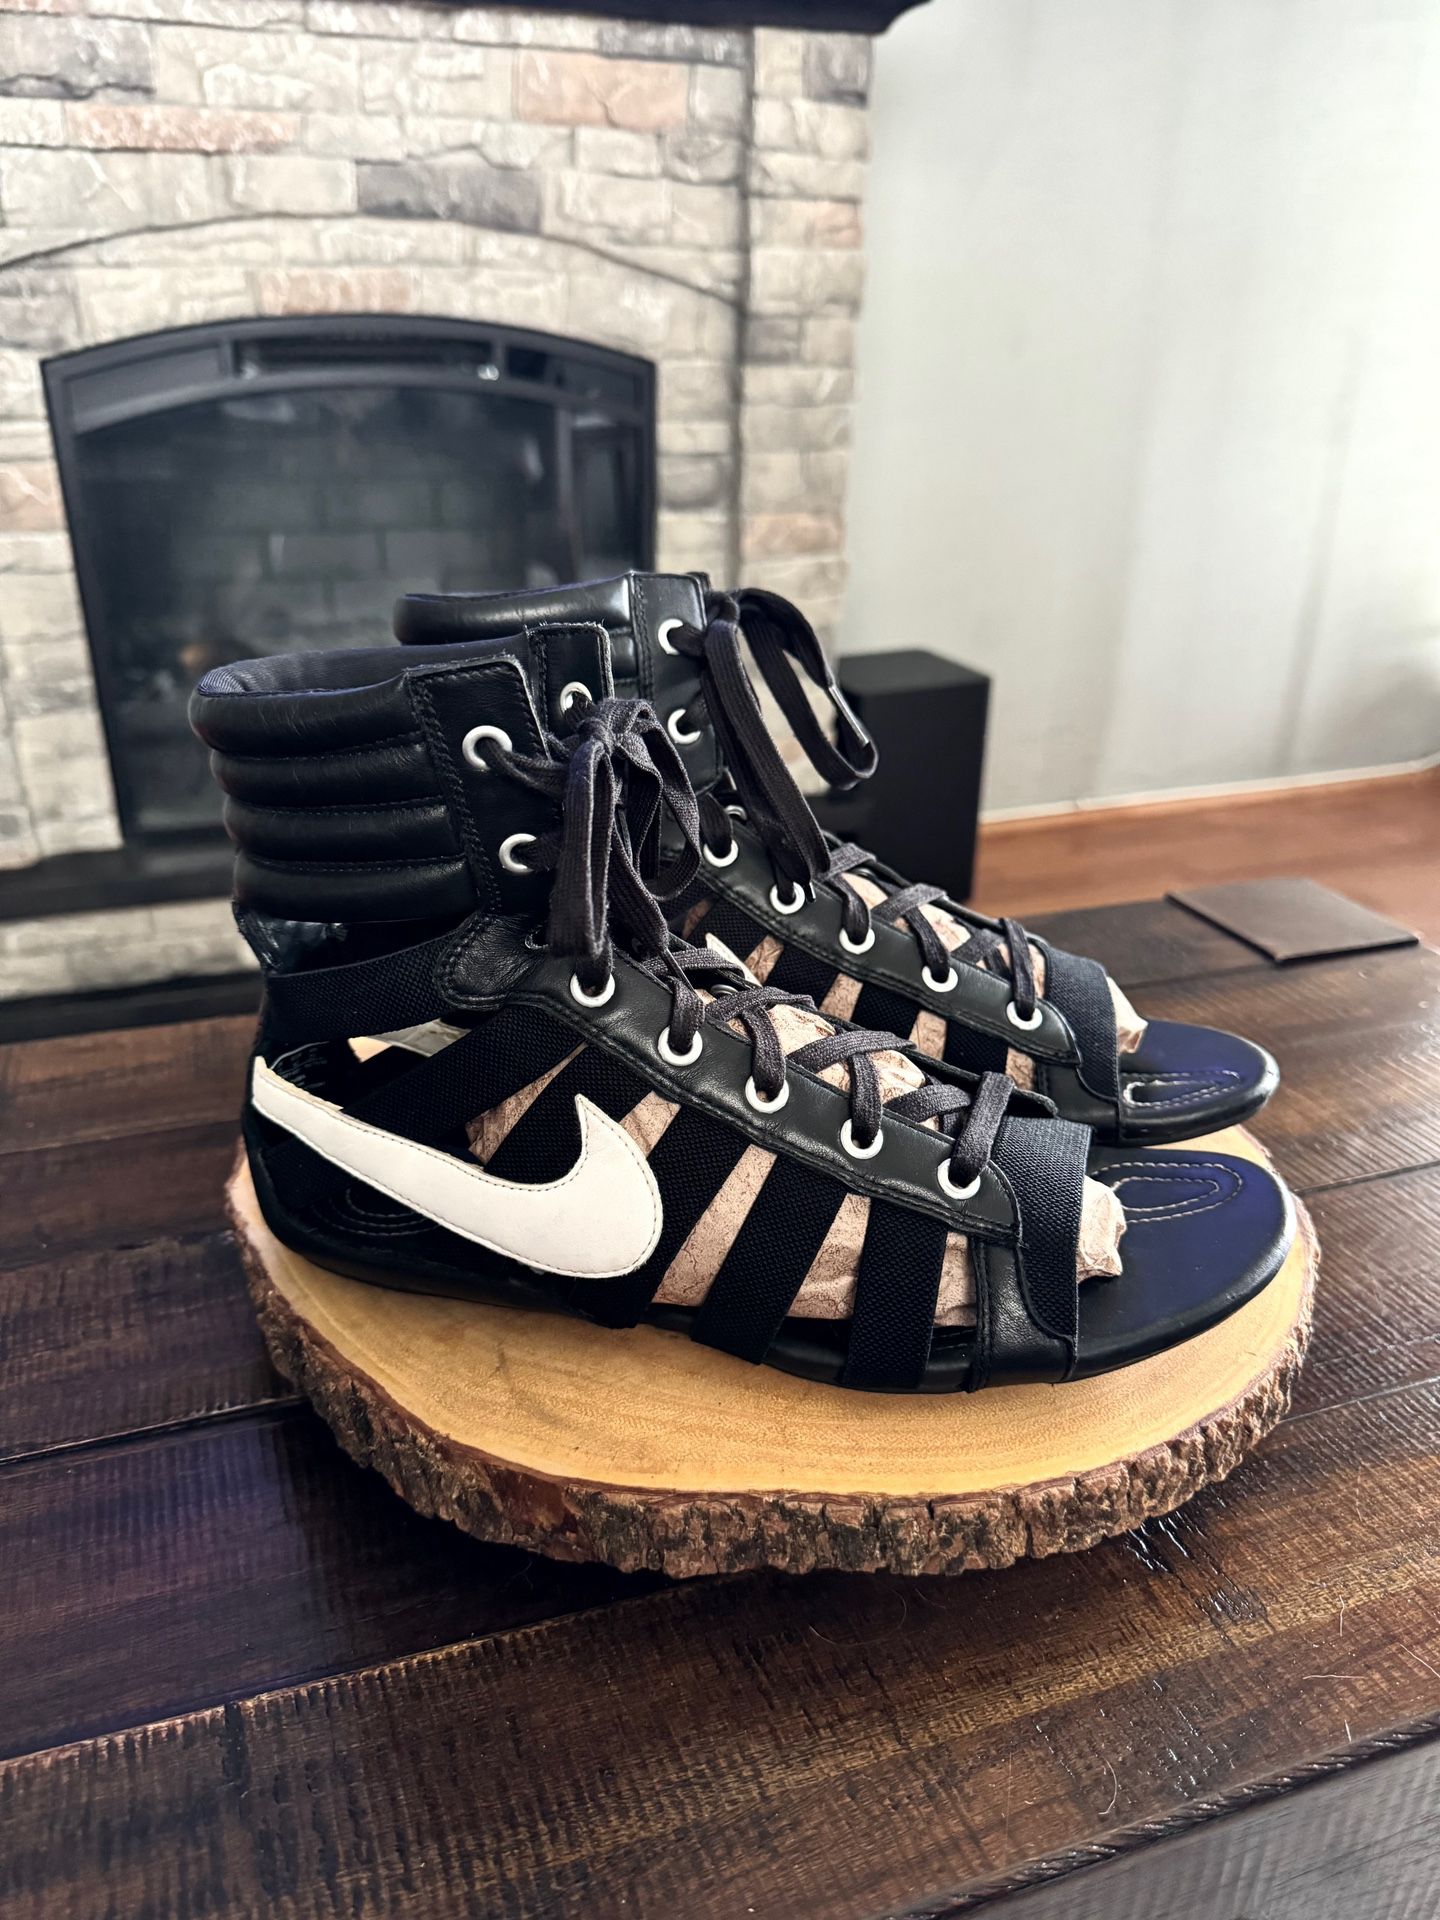 Rare! Women’s Nike gladiator lace up sandal flats bohemian size 10. Retail $200. Color black & white. Only worn a couple times great co